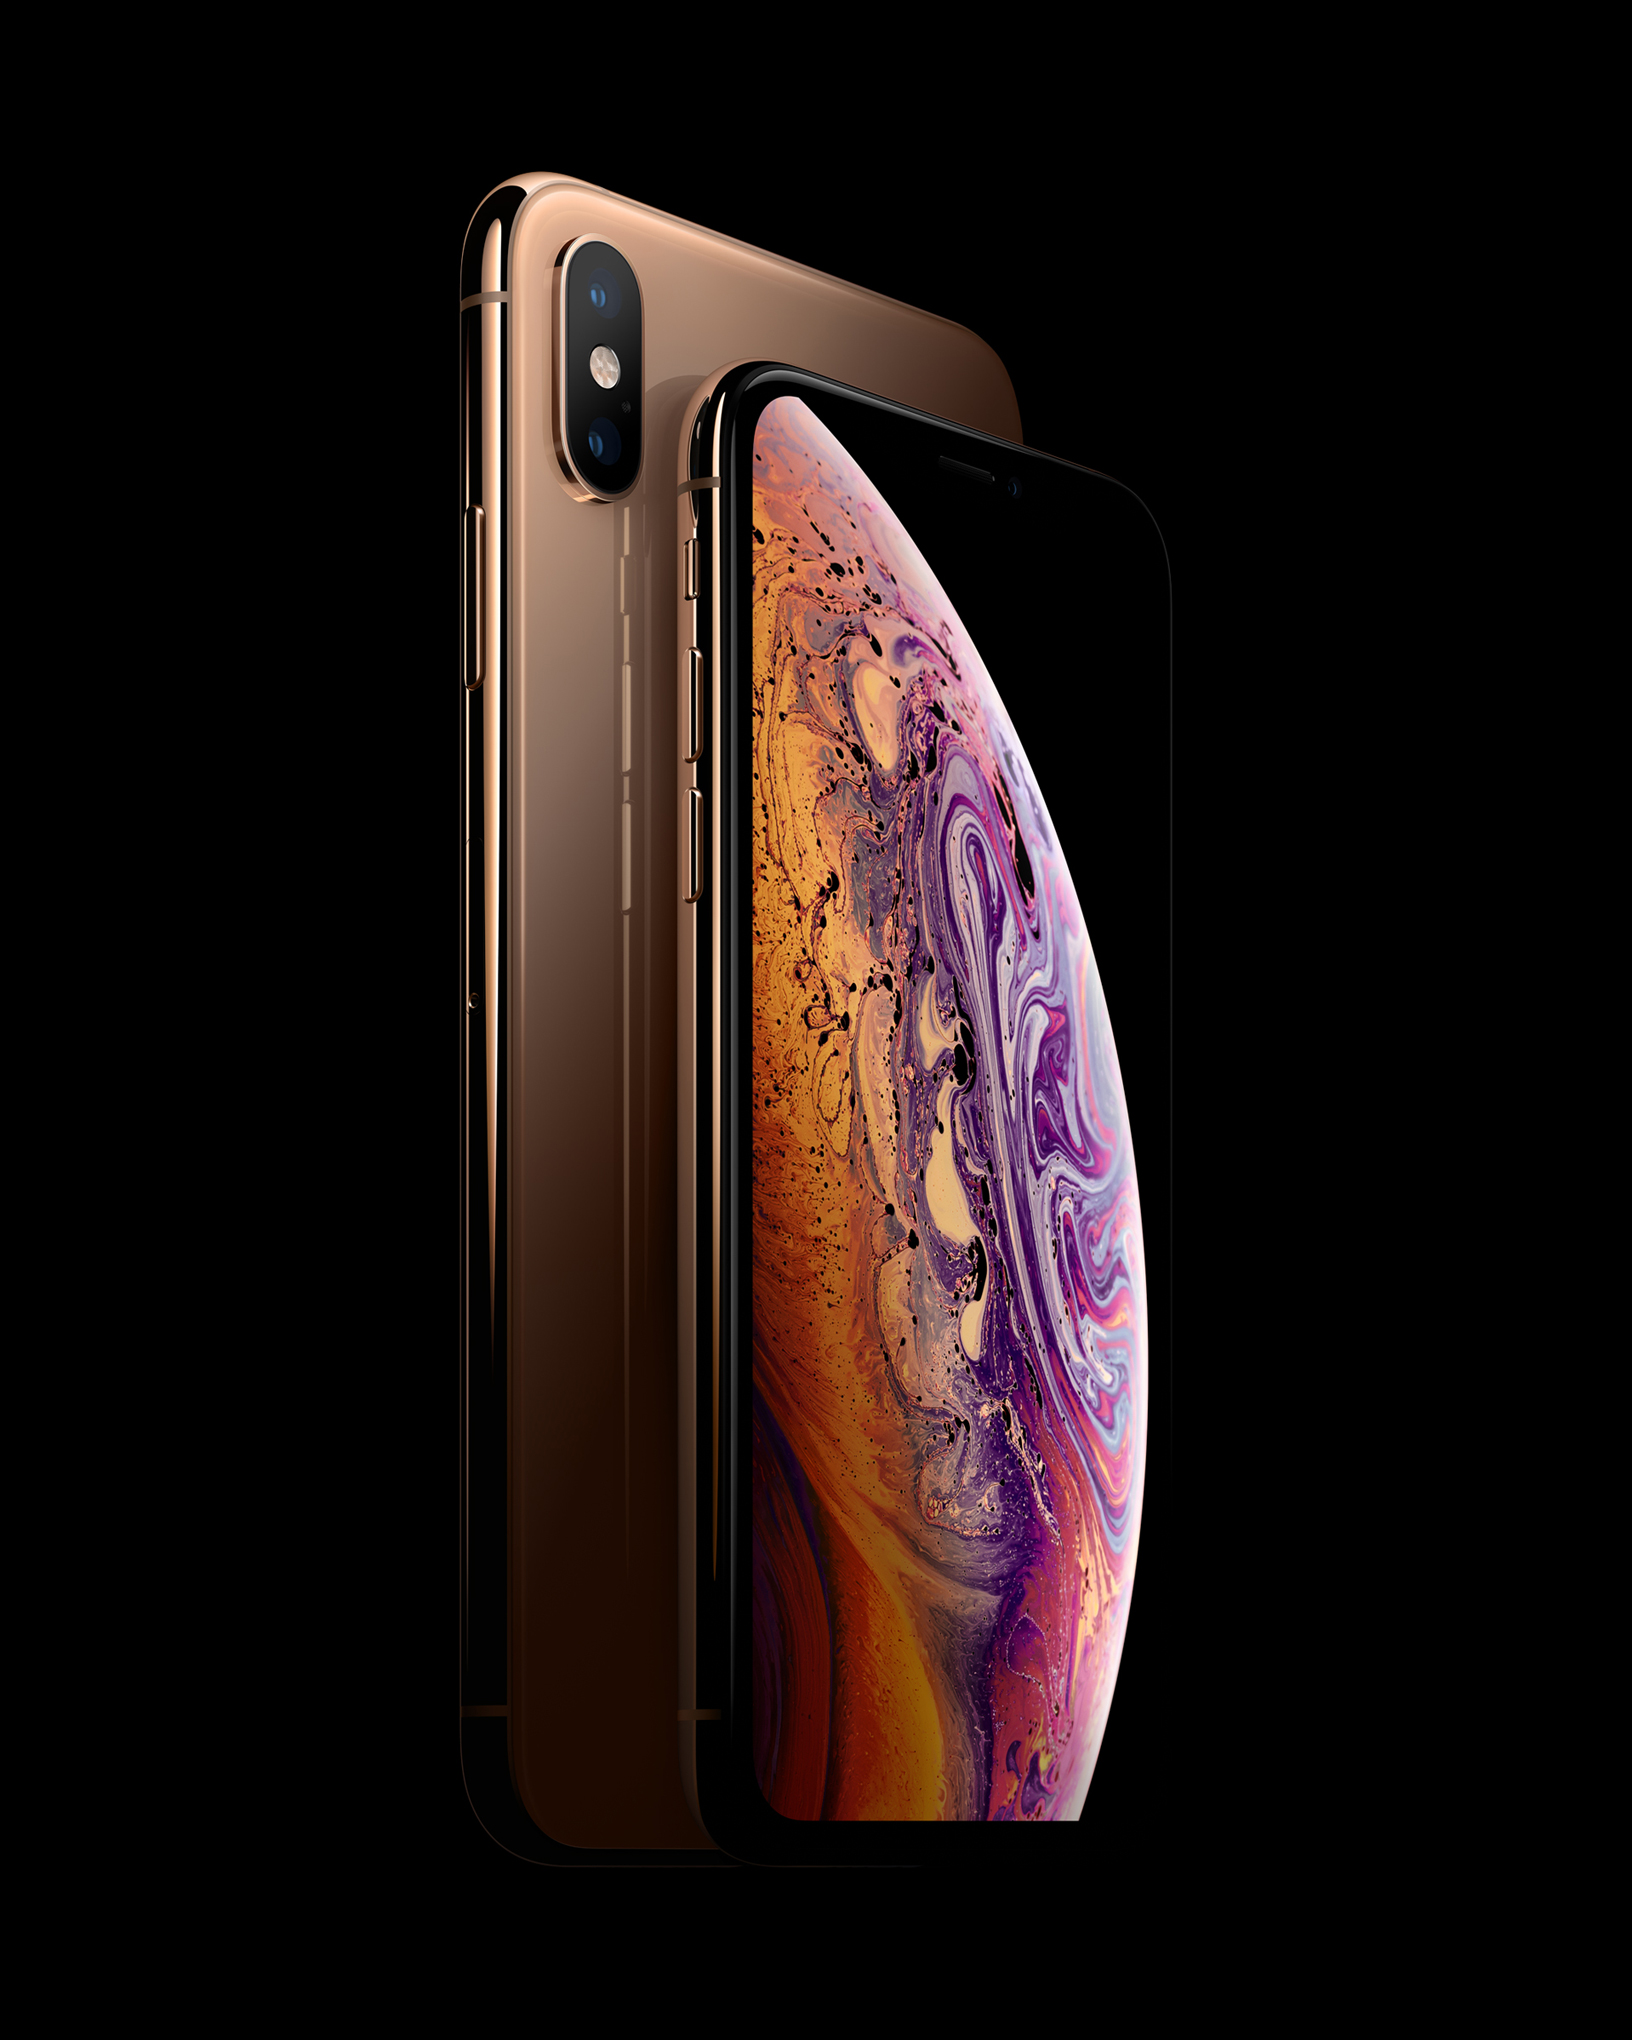 XS, XR, XS Max? The difference between the new iPhones